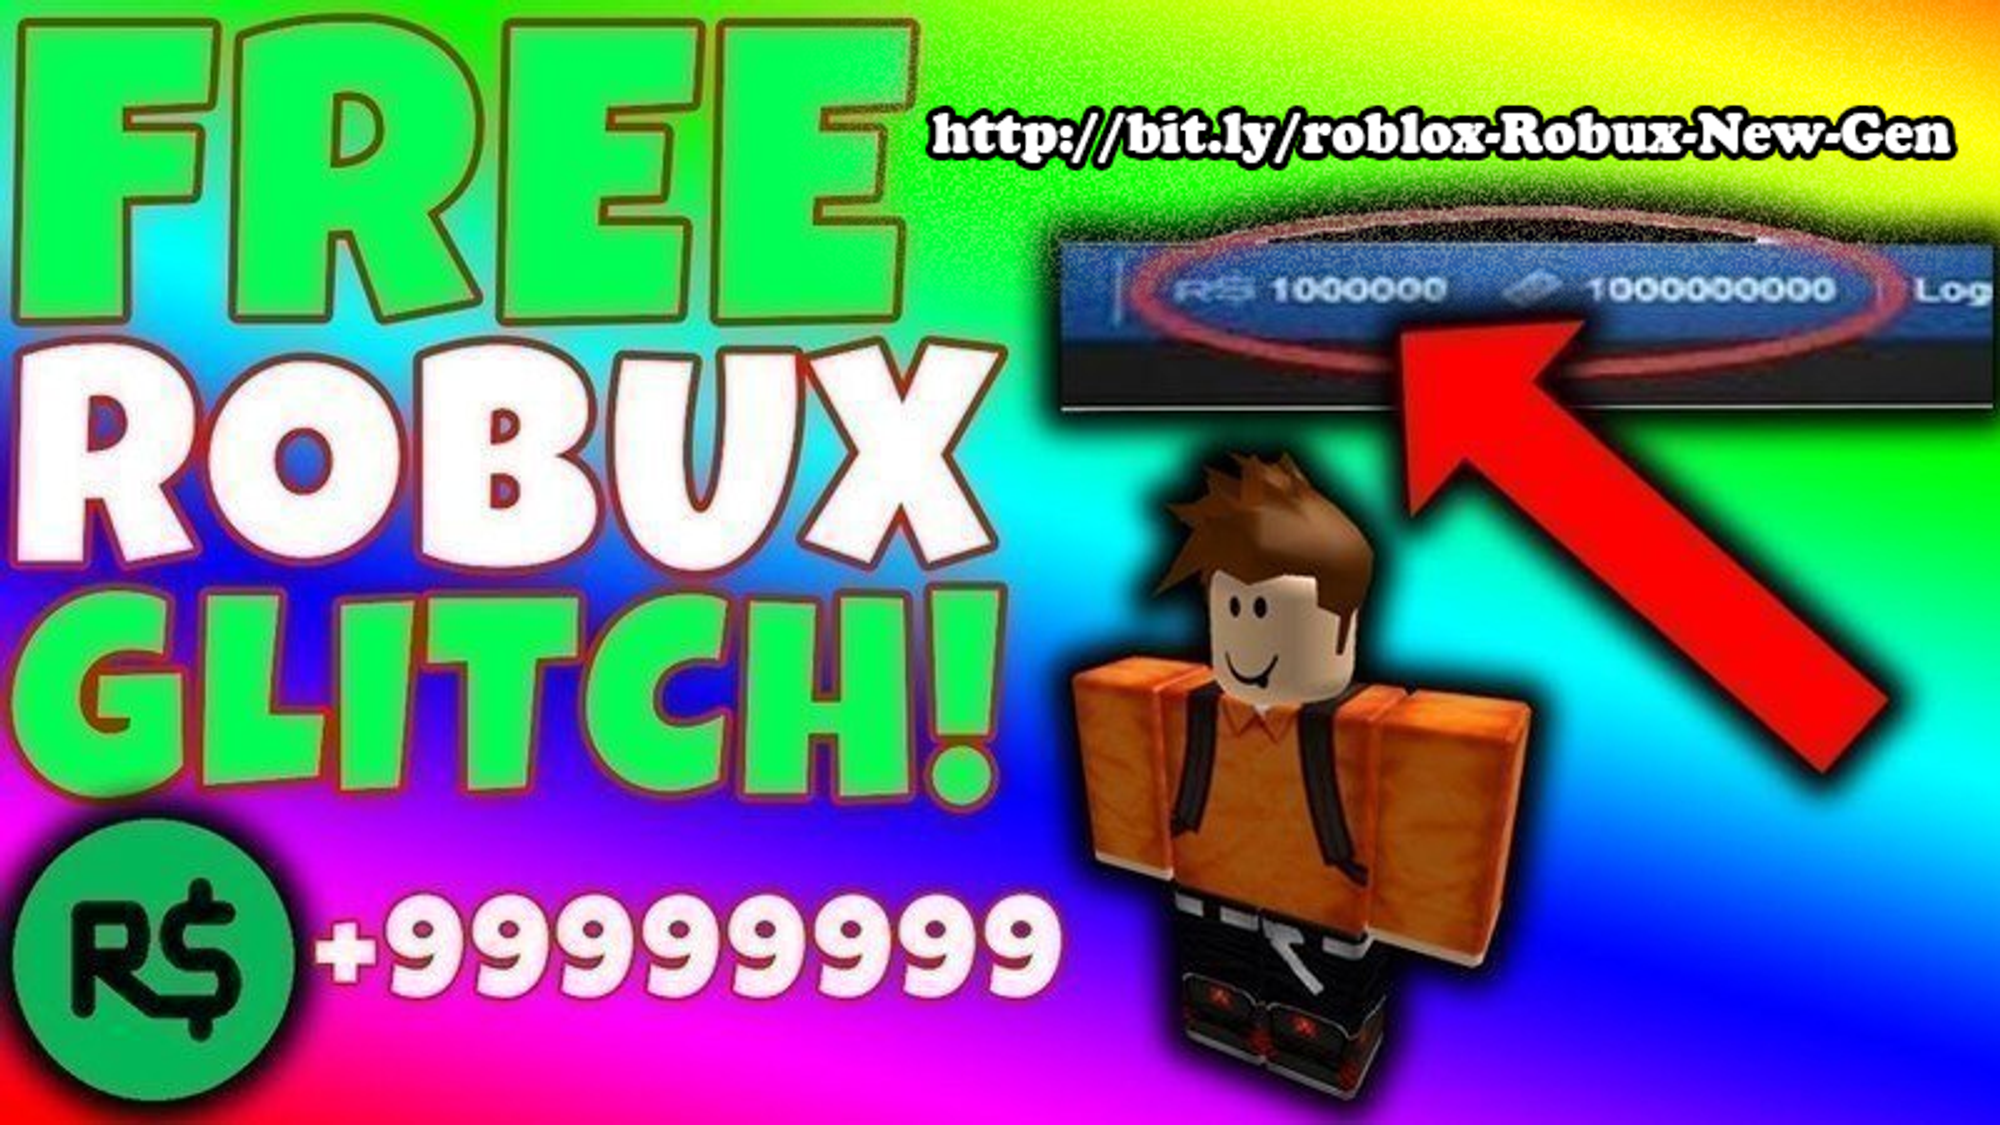 2020 How To Get Free Robux On Pc Mac Ps4 Xbox One No Human Verification Robux Generator - hack roblox on kindle fire for robux